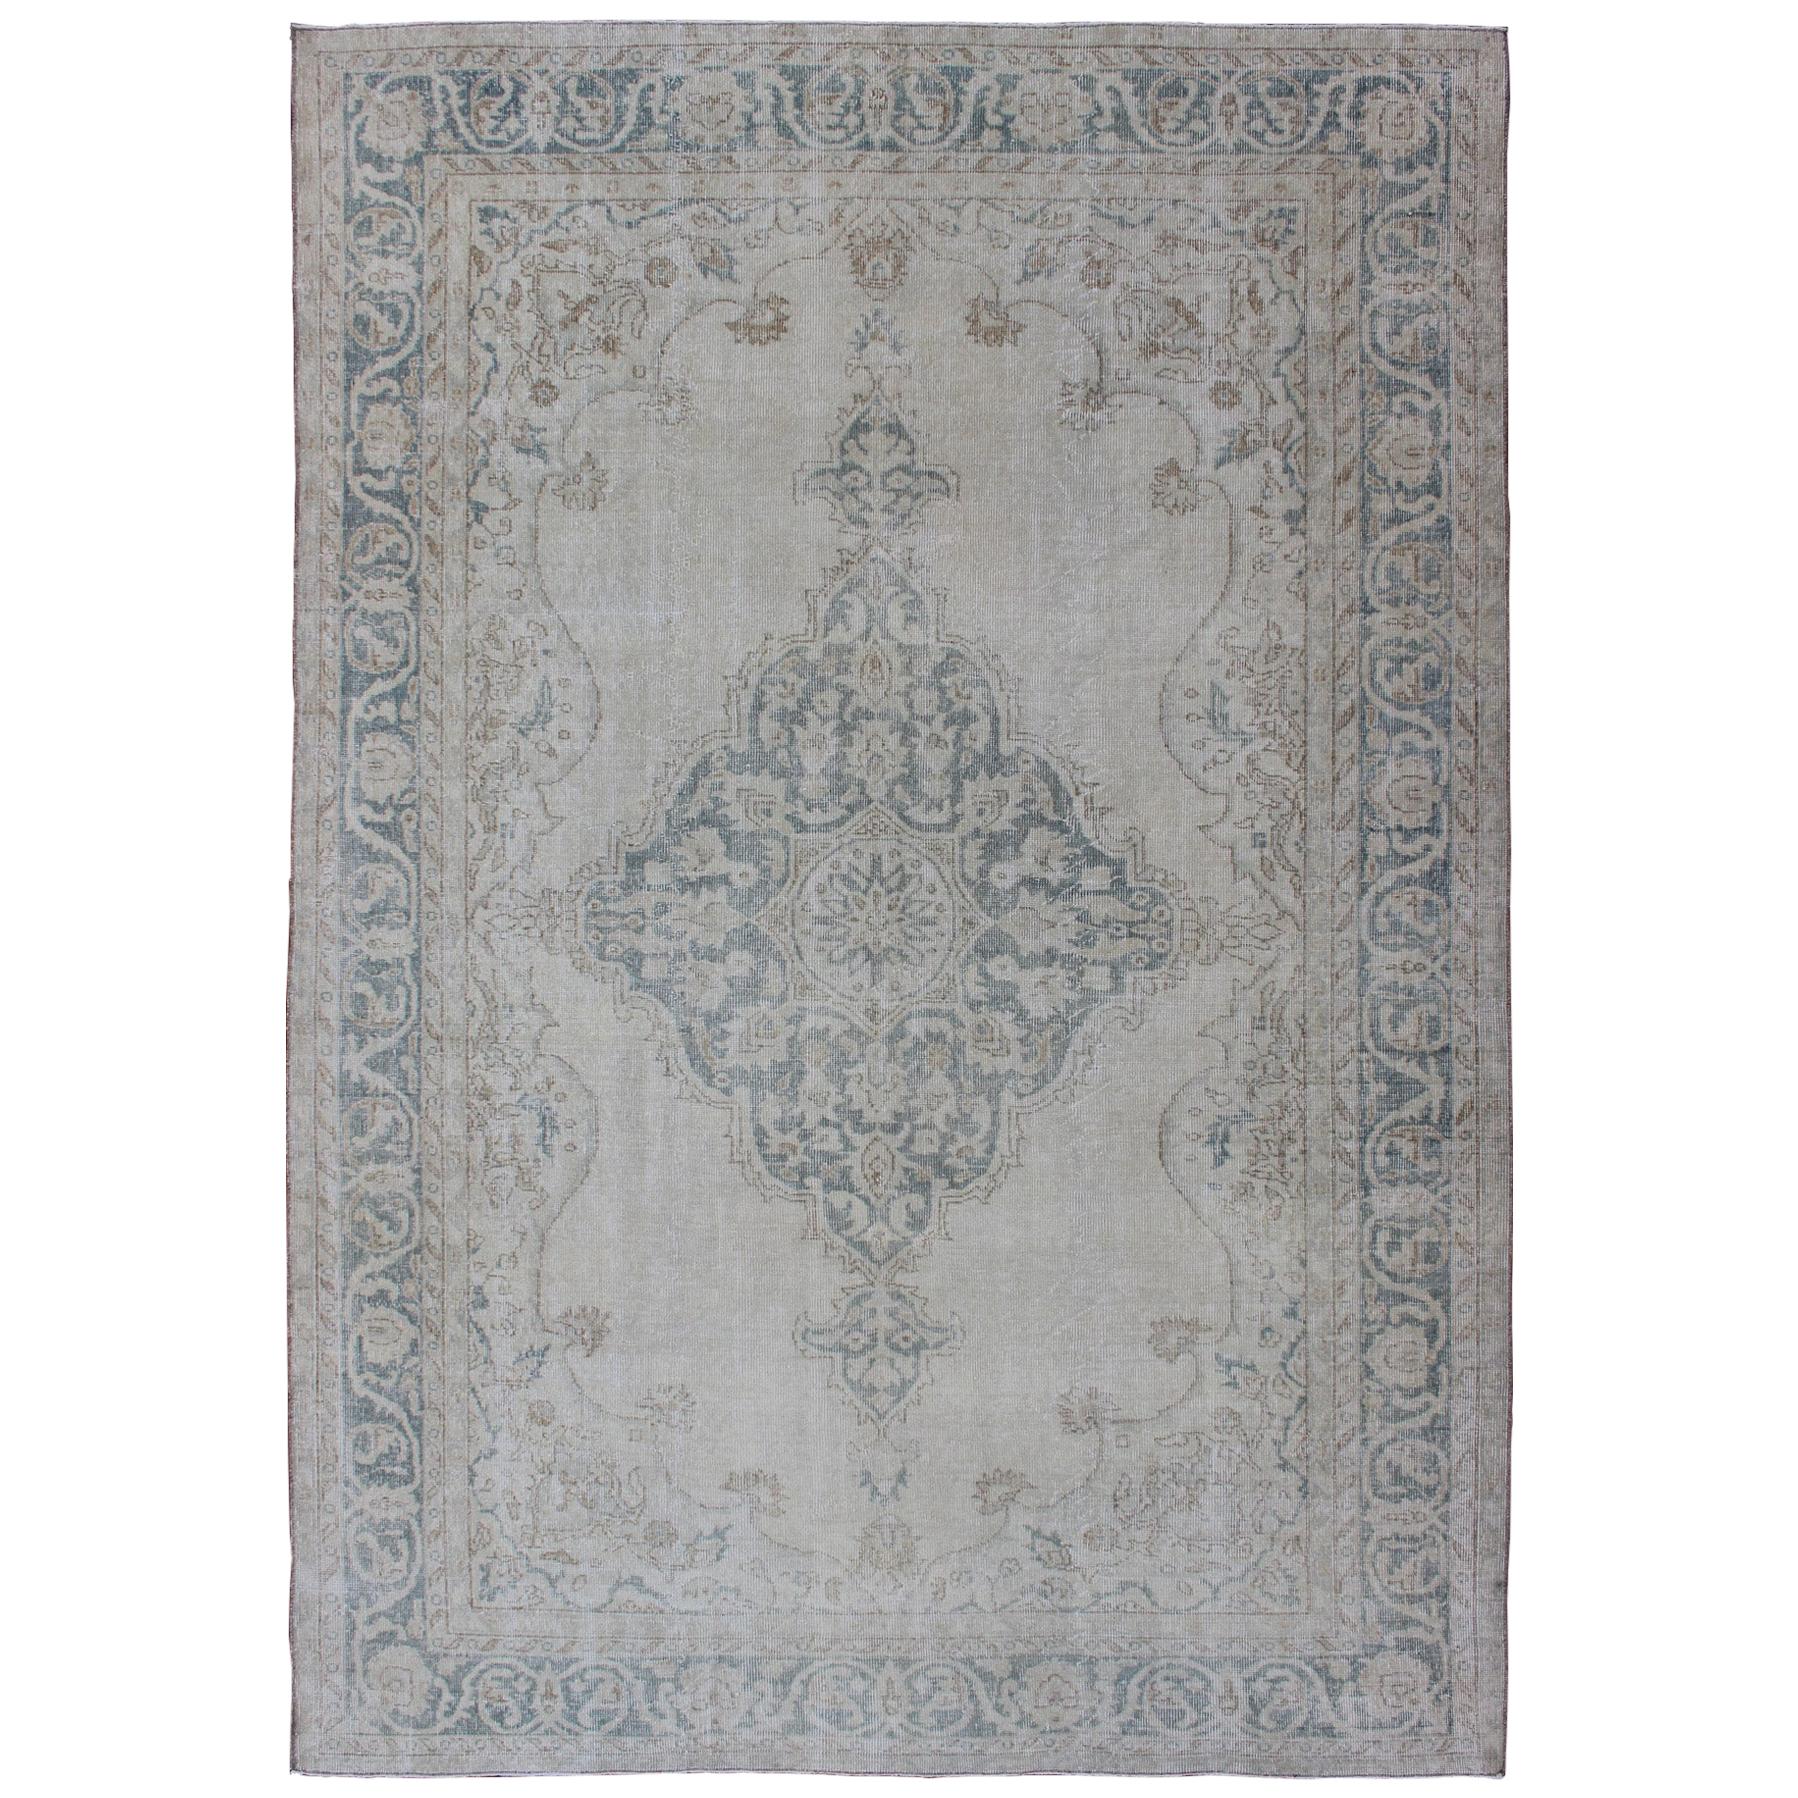 Medallion Distressed Oushak Turkey in Cream, Blue Tones, brown and Teal Blue For Sale